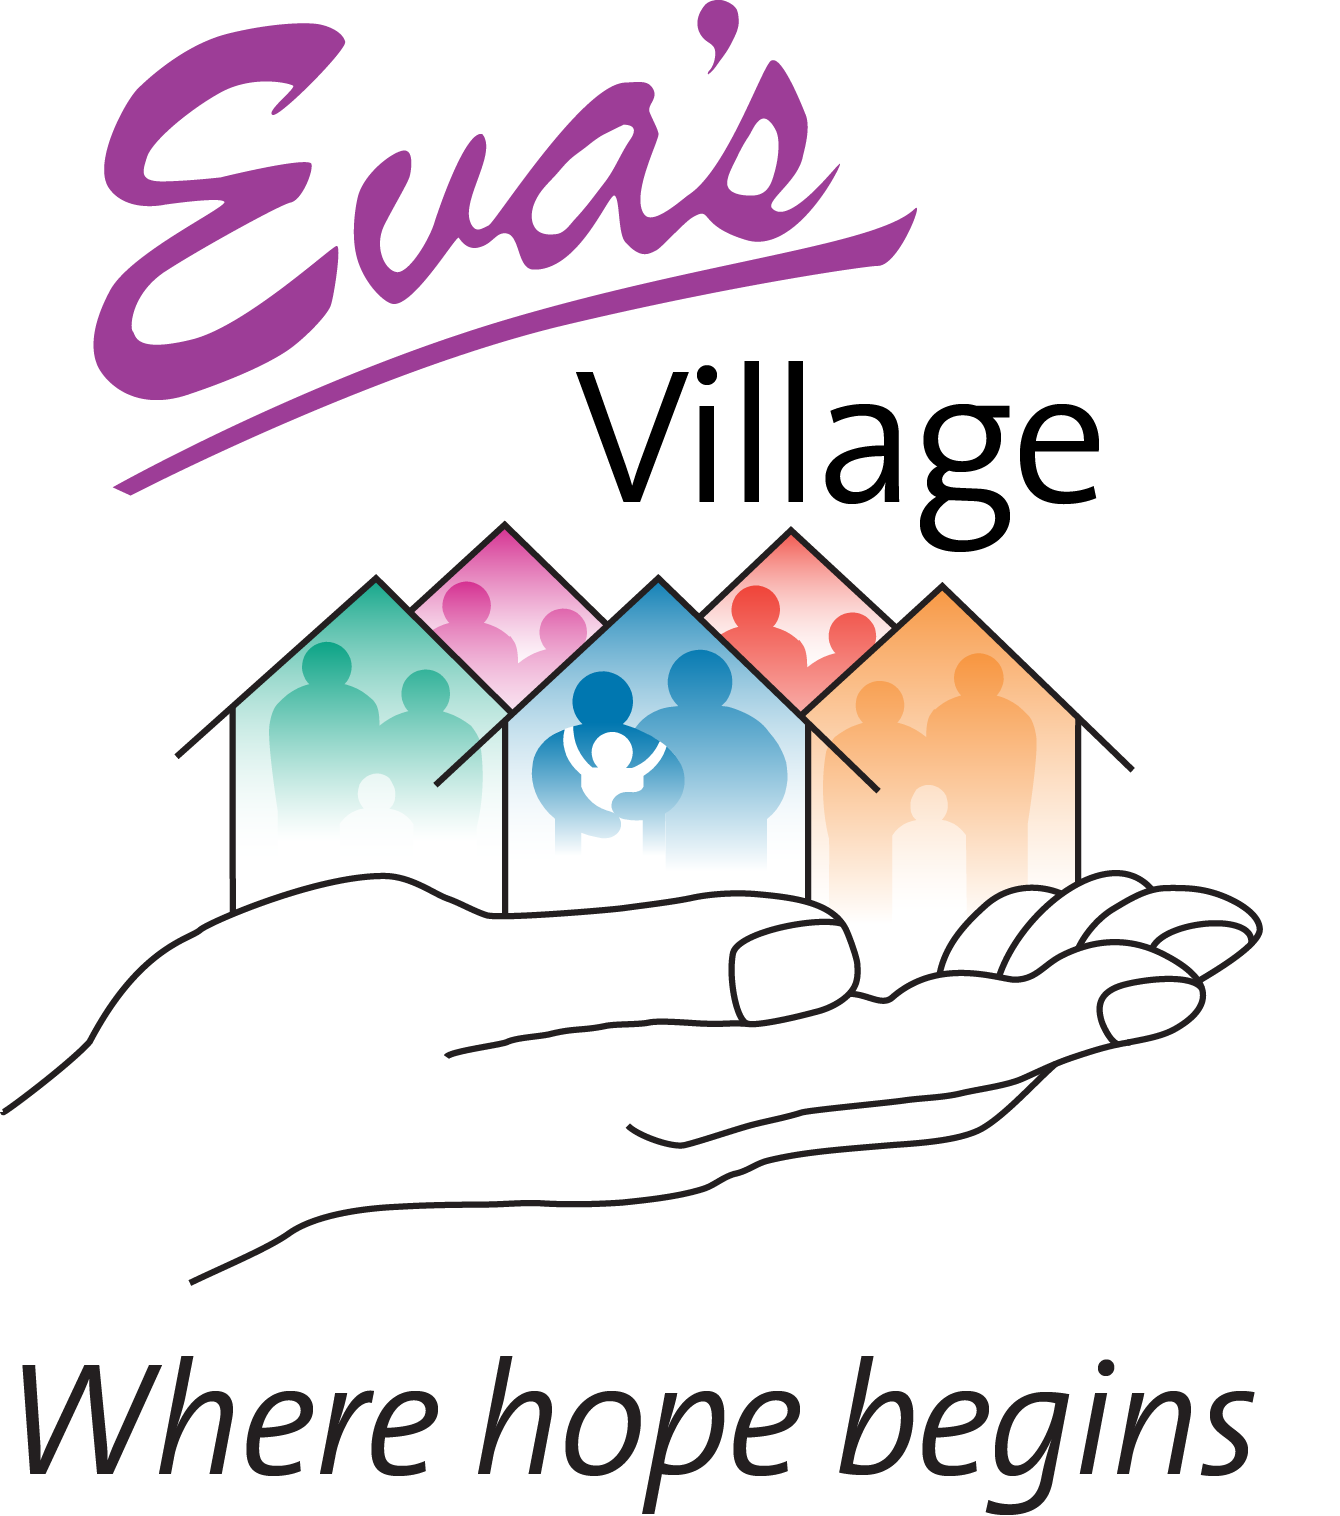 Eva's Village mission is to feed the hungry, shelter the homeless, treat the addicted and provide medical and dental care to the poor with respect for the human dignity of each individual.